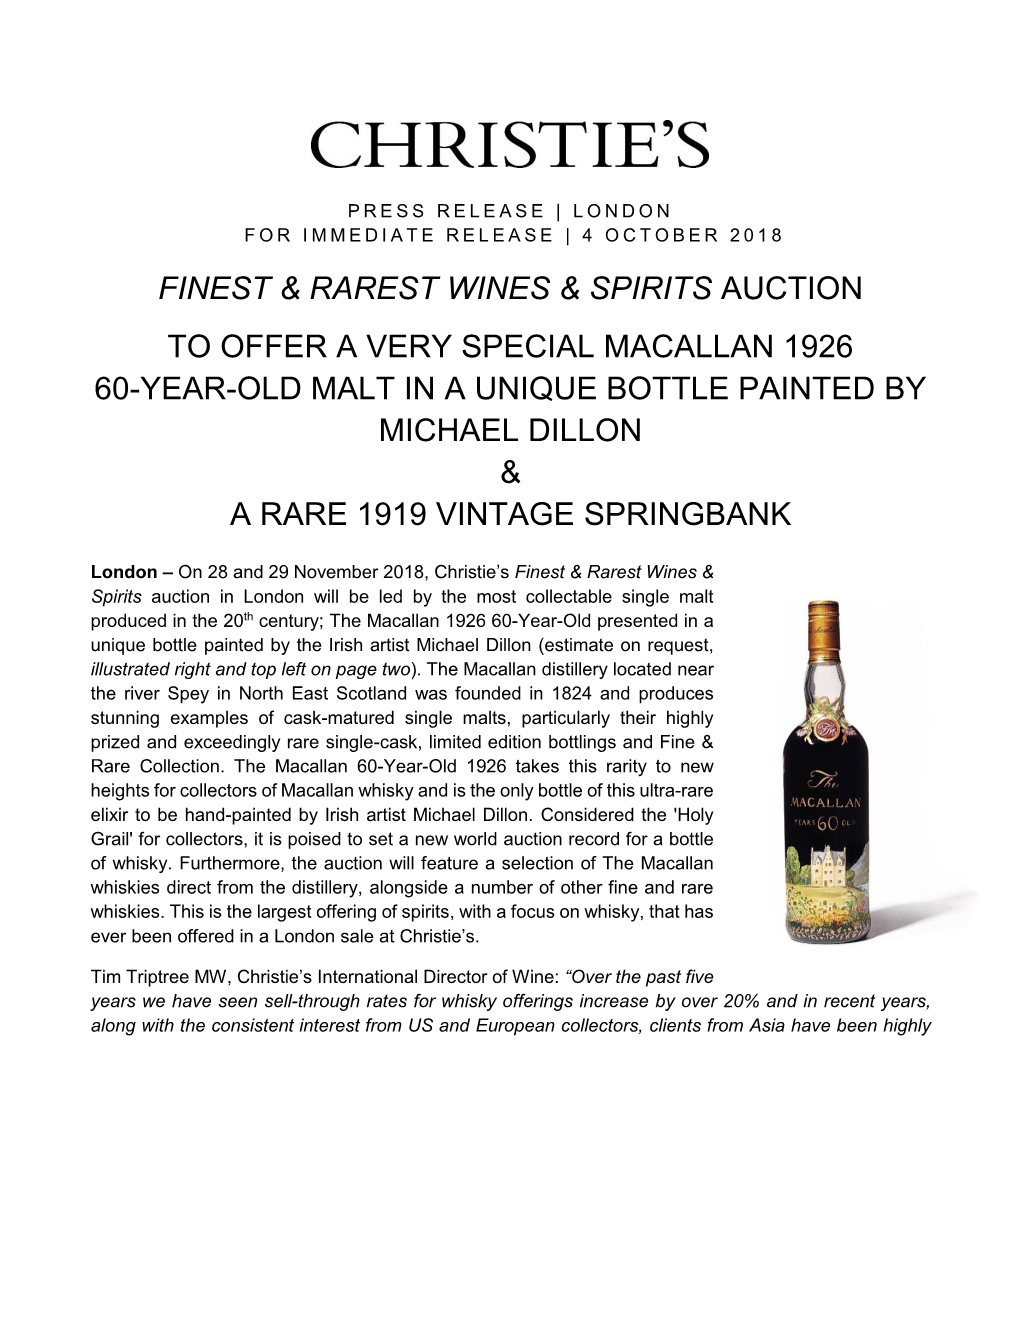 Finest & Rarest Wines & Spirits Auction to Offer a Very Special Macallan 1926 60-Year-Old Malt in a Unique Bottle Paint